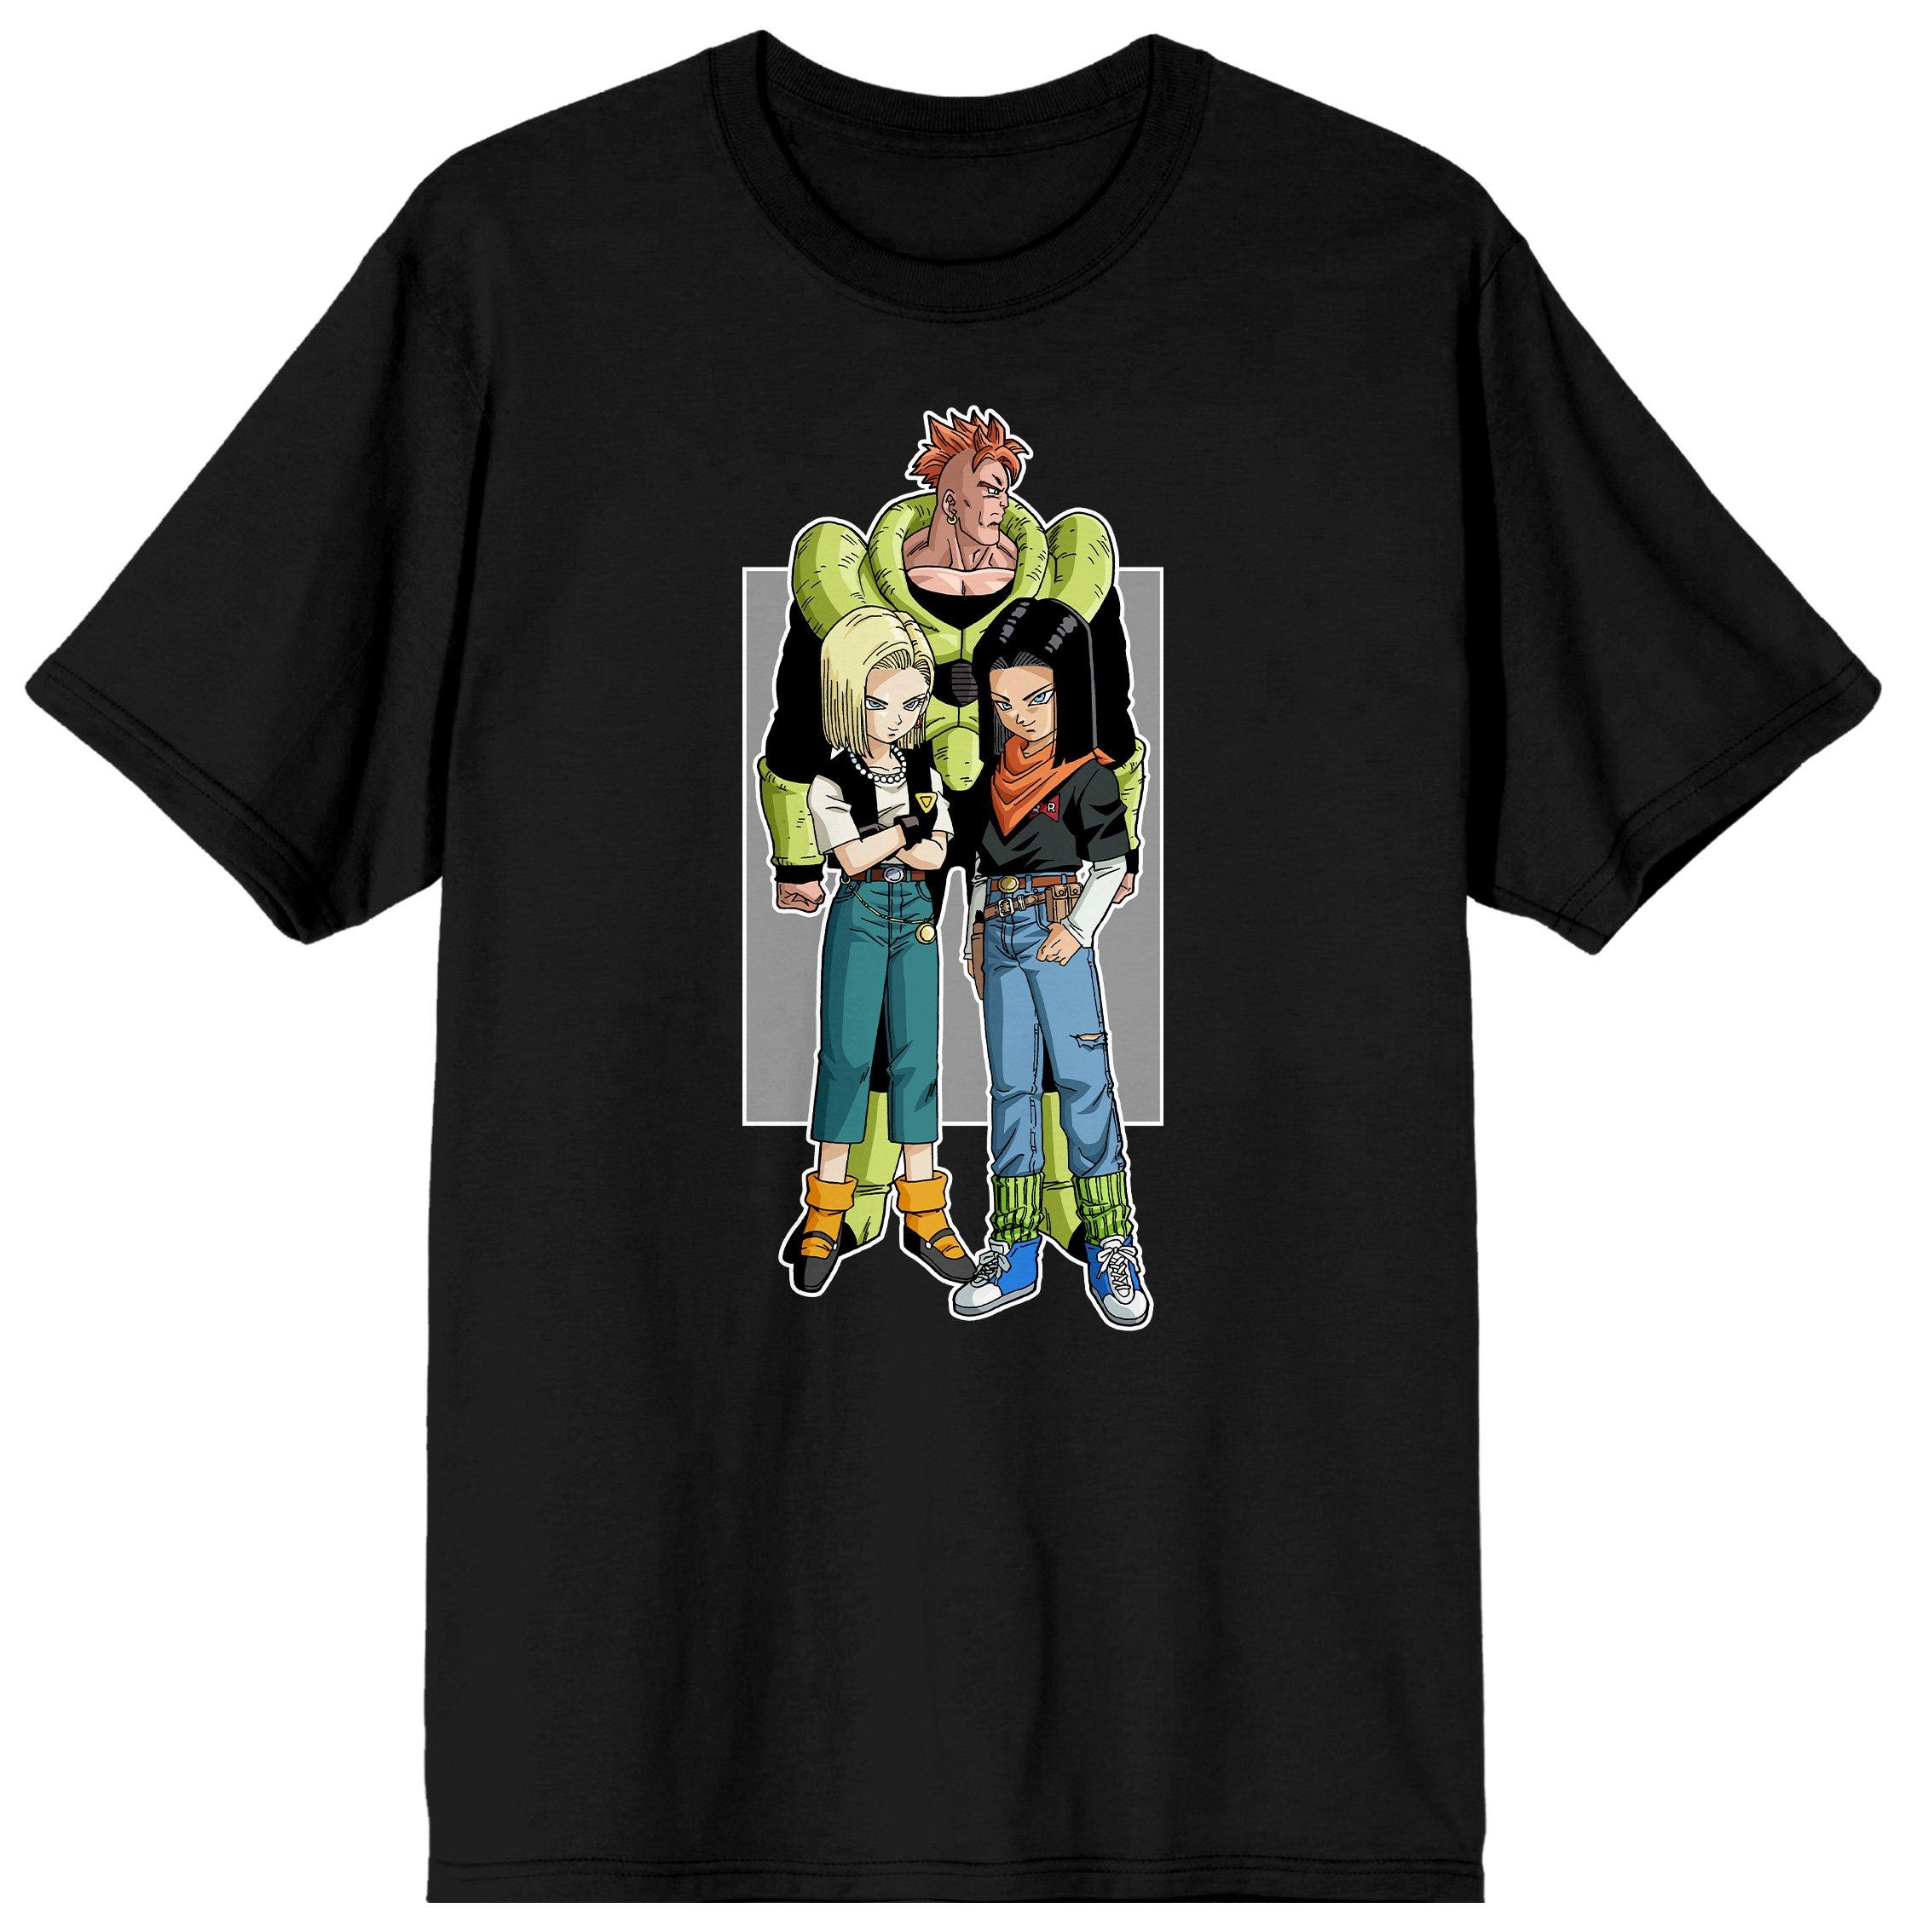 Dragon Ball Z Anime Android 16, 17, and 18 Characters Men's Black Short Sleeve T-Shirt, Size: 2XL, Bioworld Merchandising